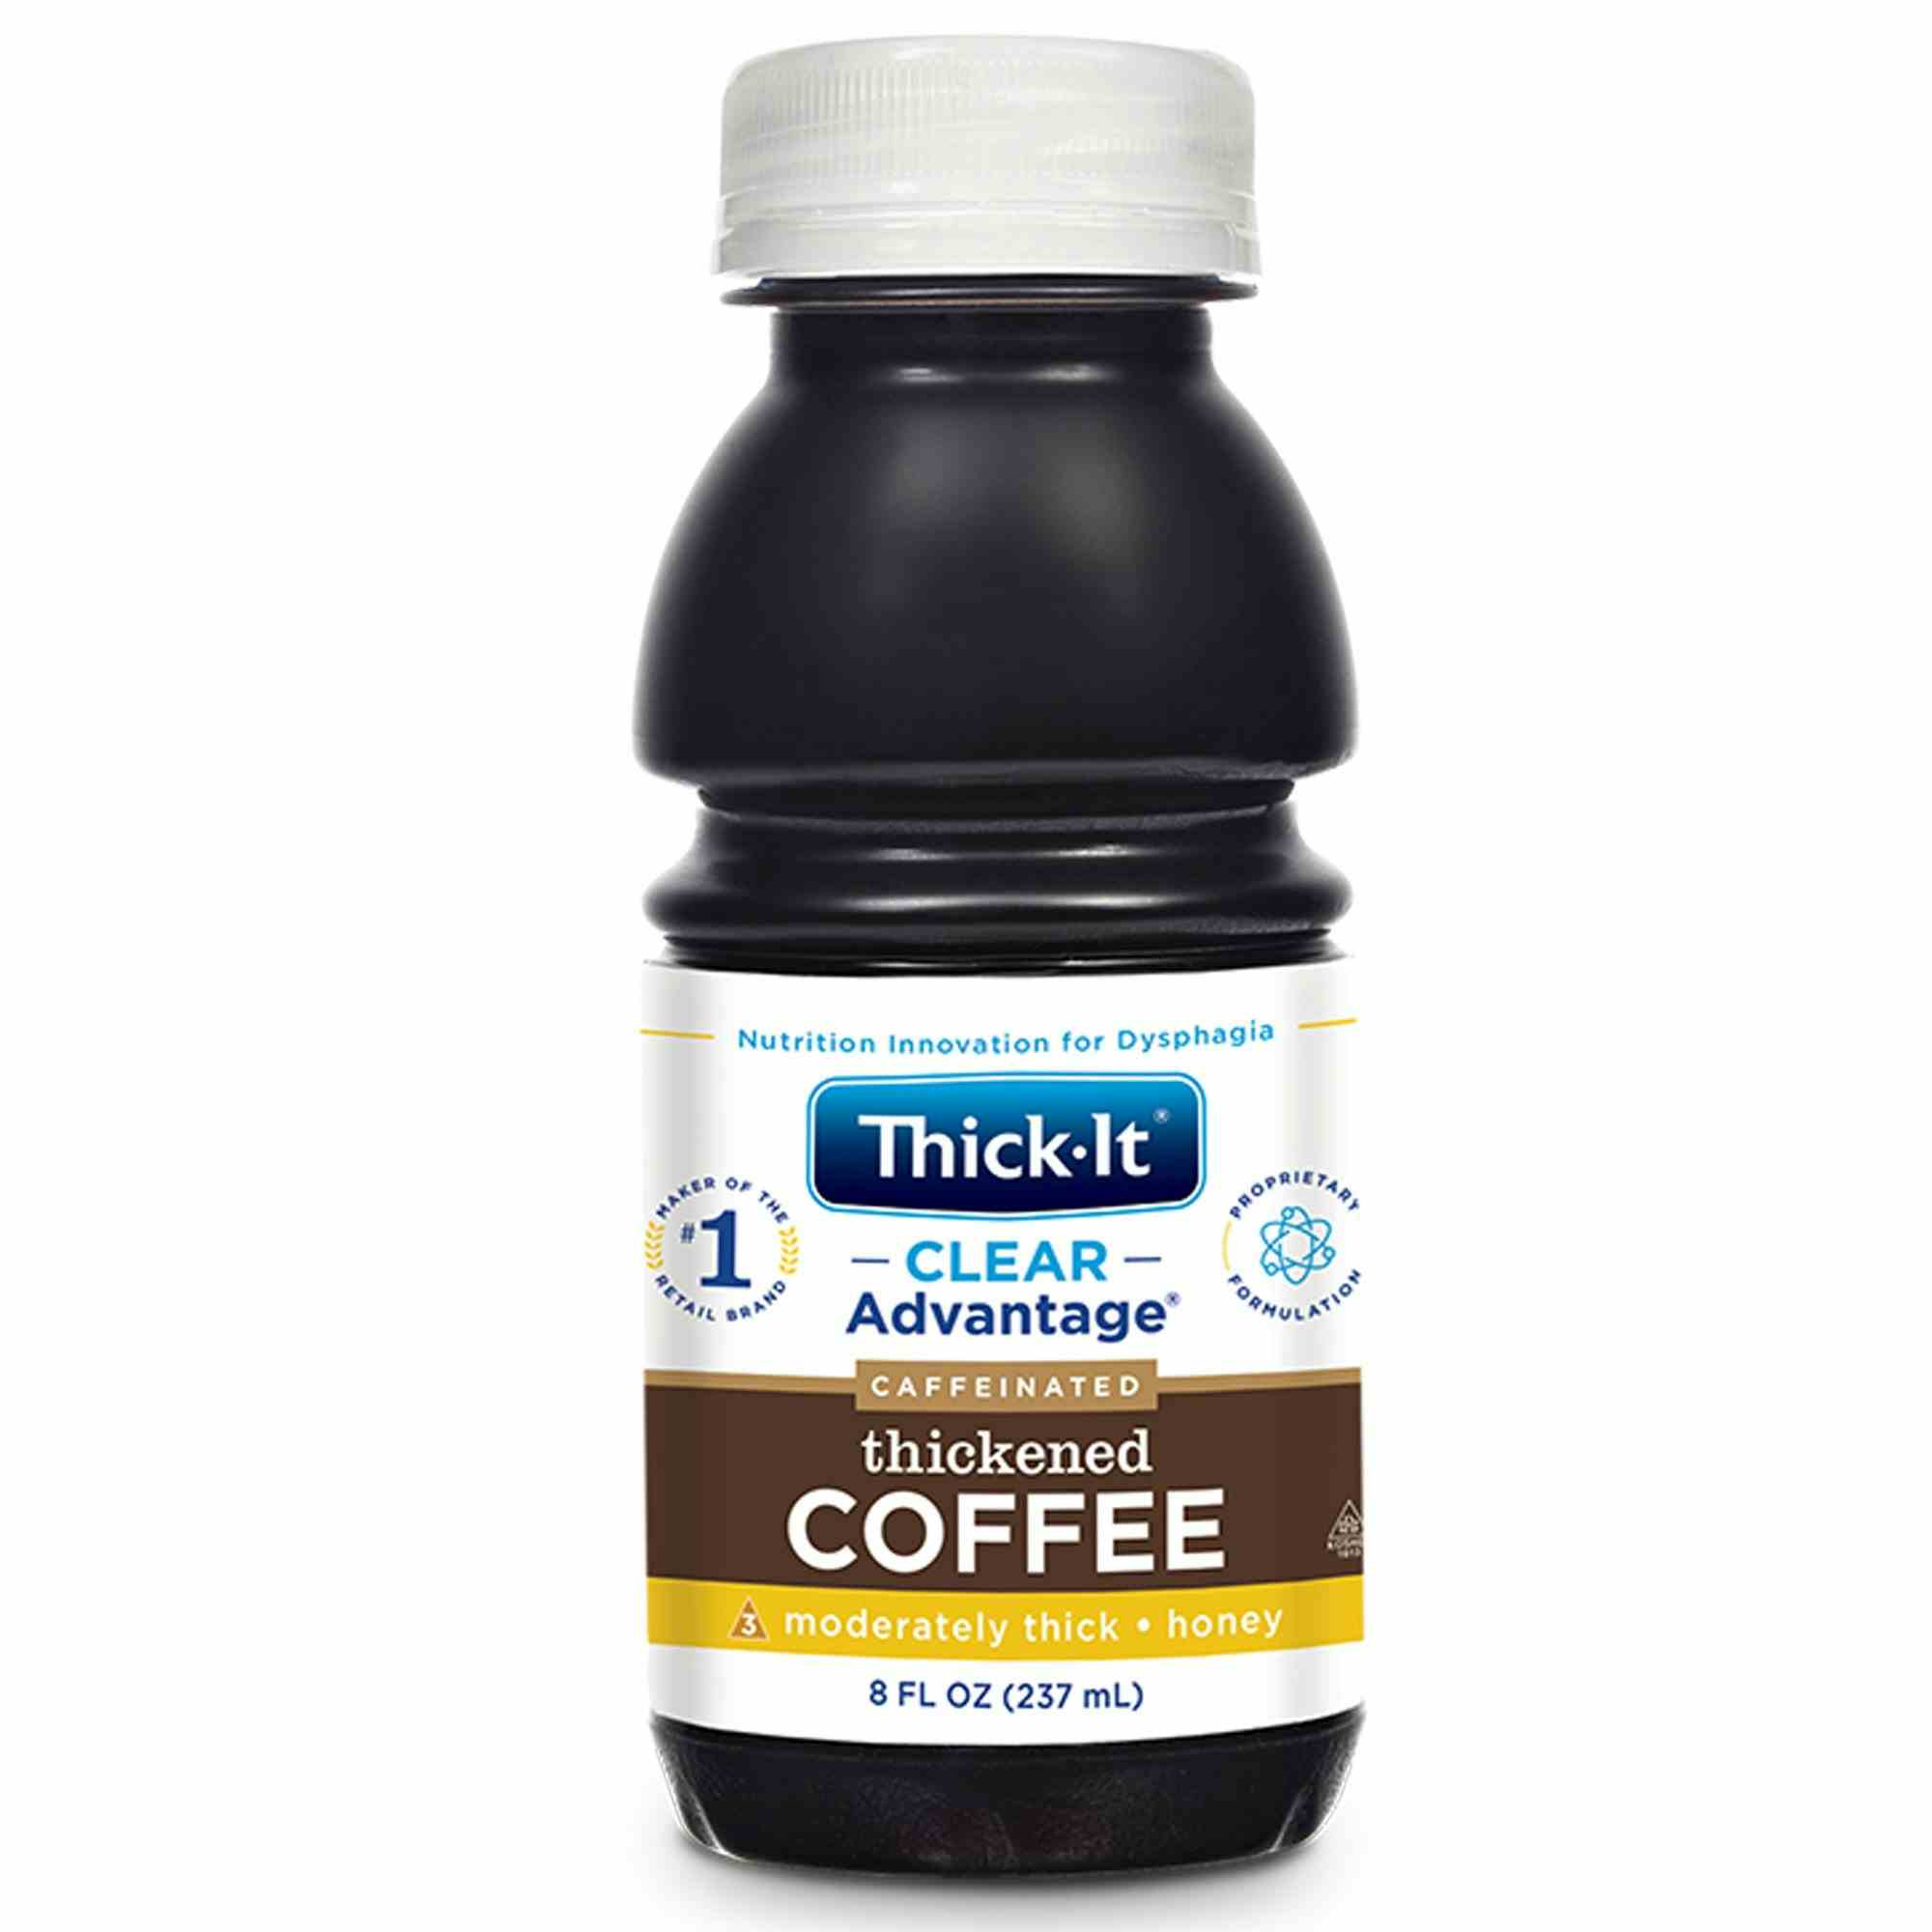 Thick-It Clear Advantage Caffeinated Thickened Coffee, Moderately Thick, Honey Consistency, 8 oz., B471-L9044, Case of 24